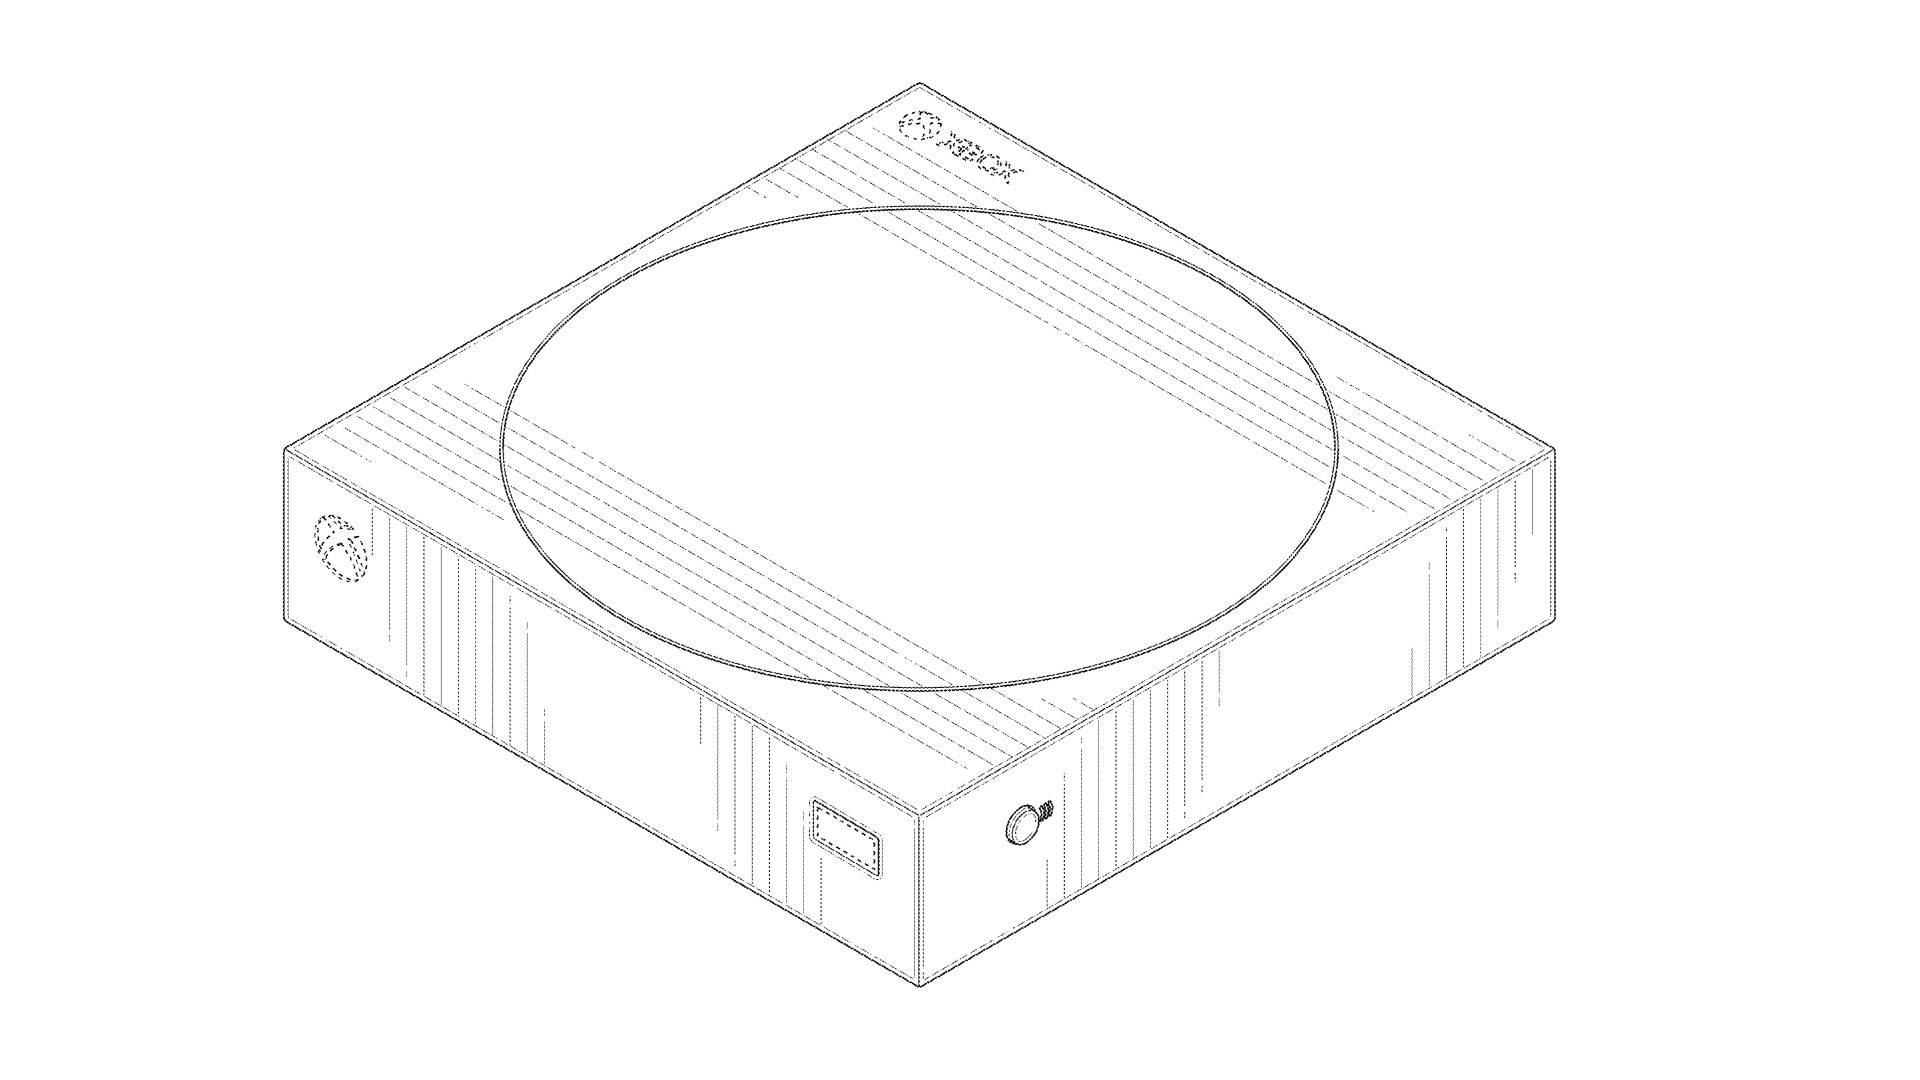 Image from a Microsoft patent filing showing the unreleased Xbox cloud console.